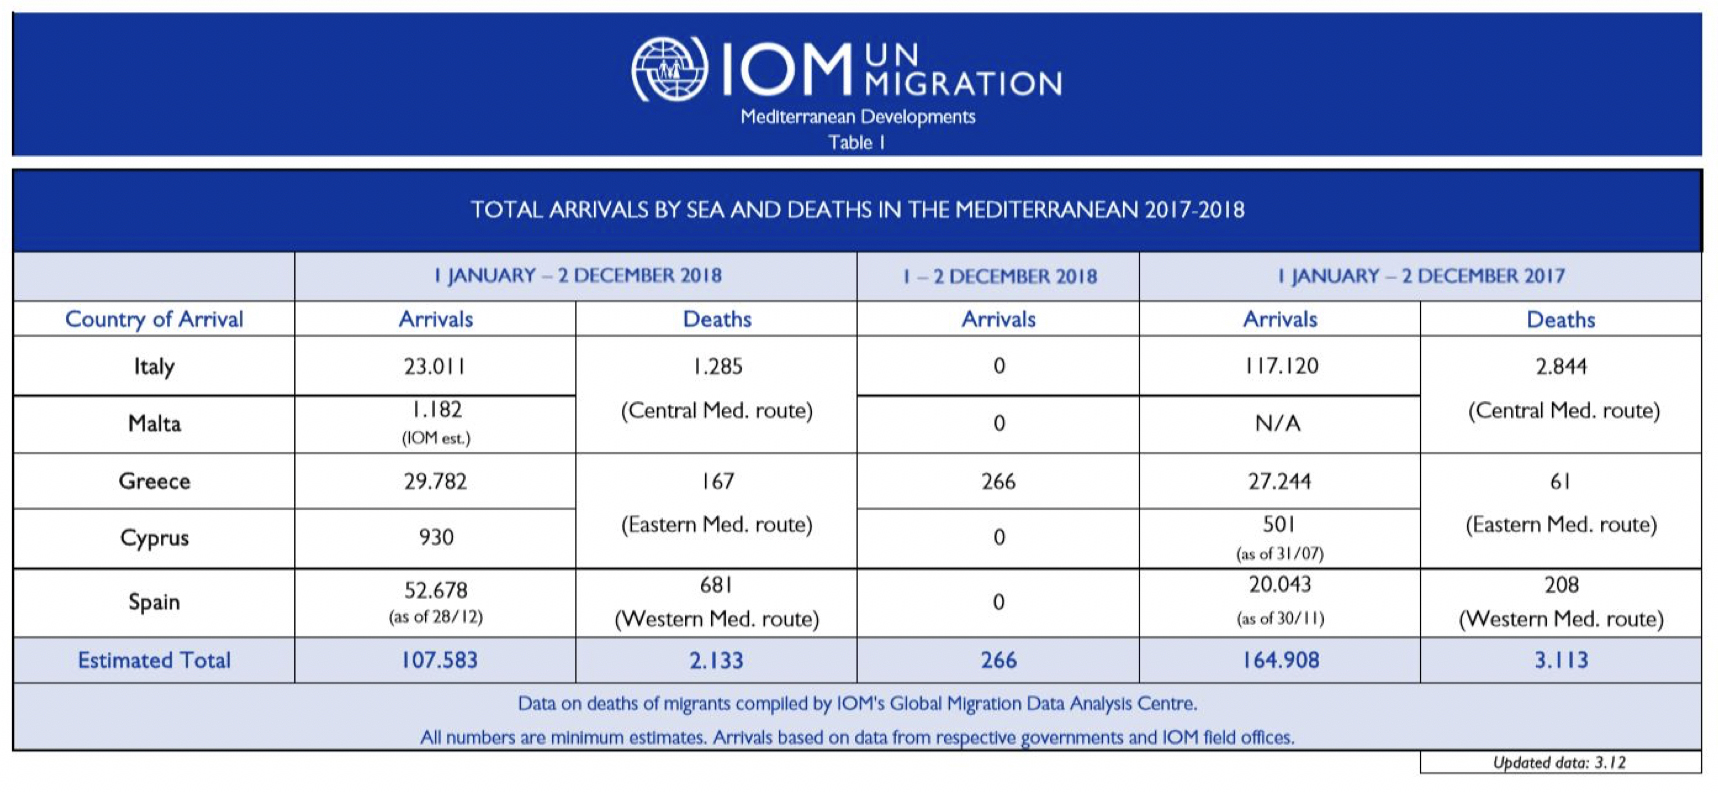 Arrived in country. IOM. Comparison of monthly Mediterranean Sea arrivals, 2014-2015 (persons). Migration and Development.